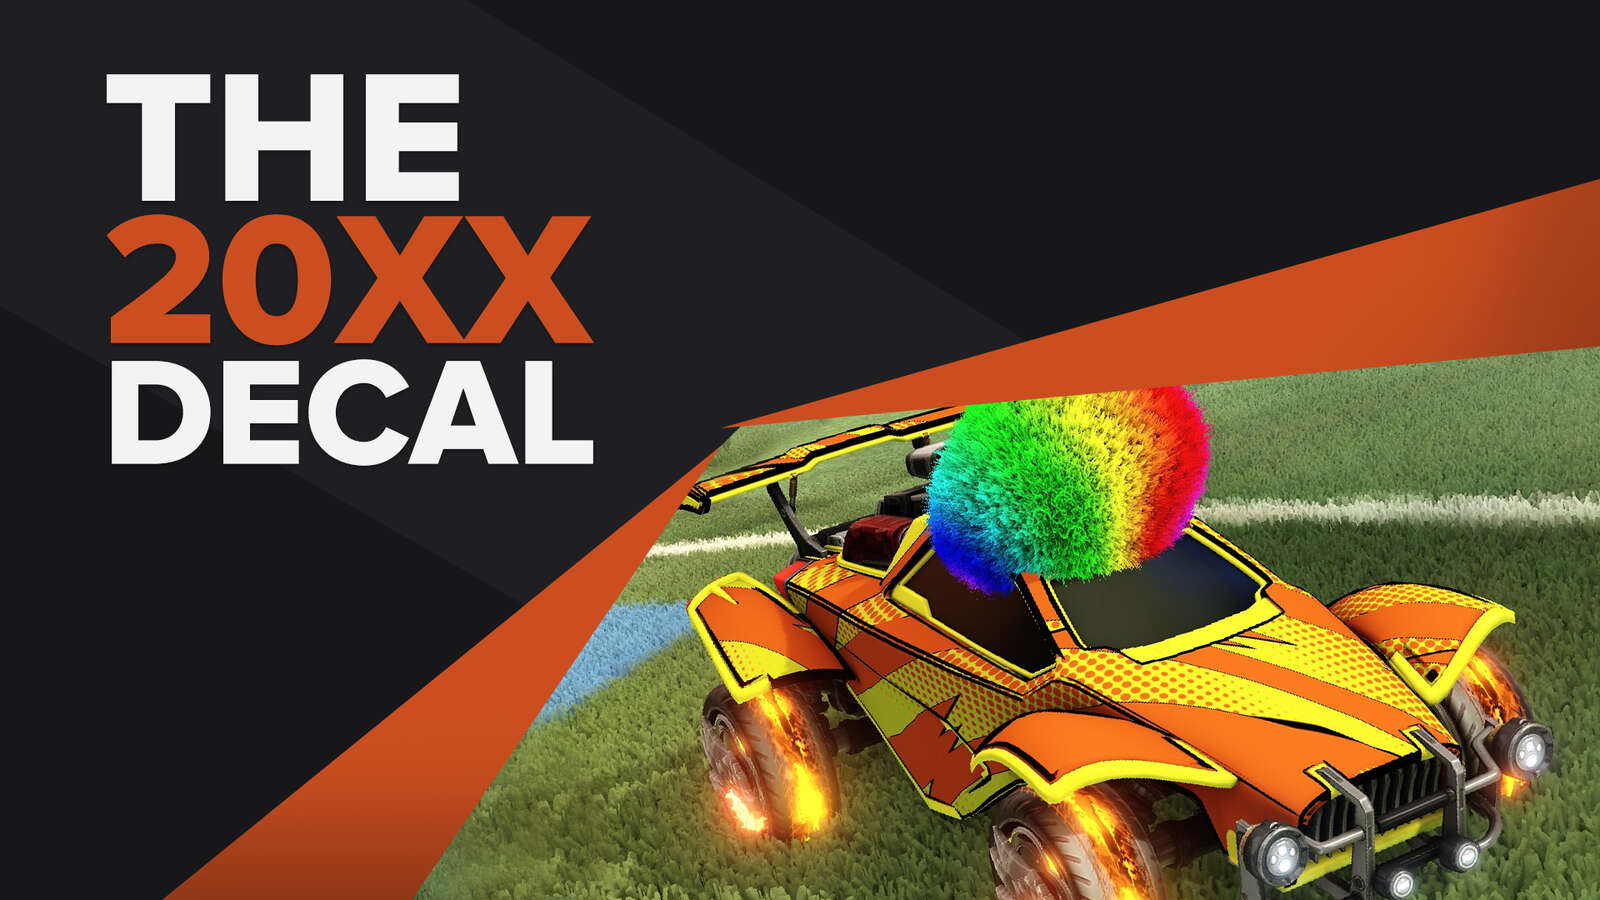 Learn everything there is to know about the 20xx decal in Rocket League!